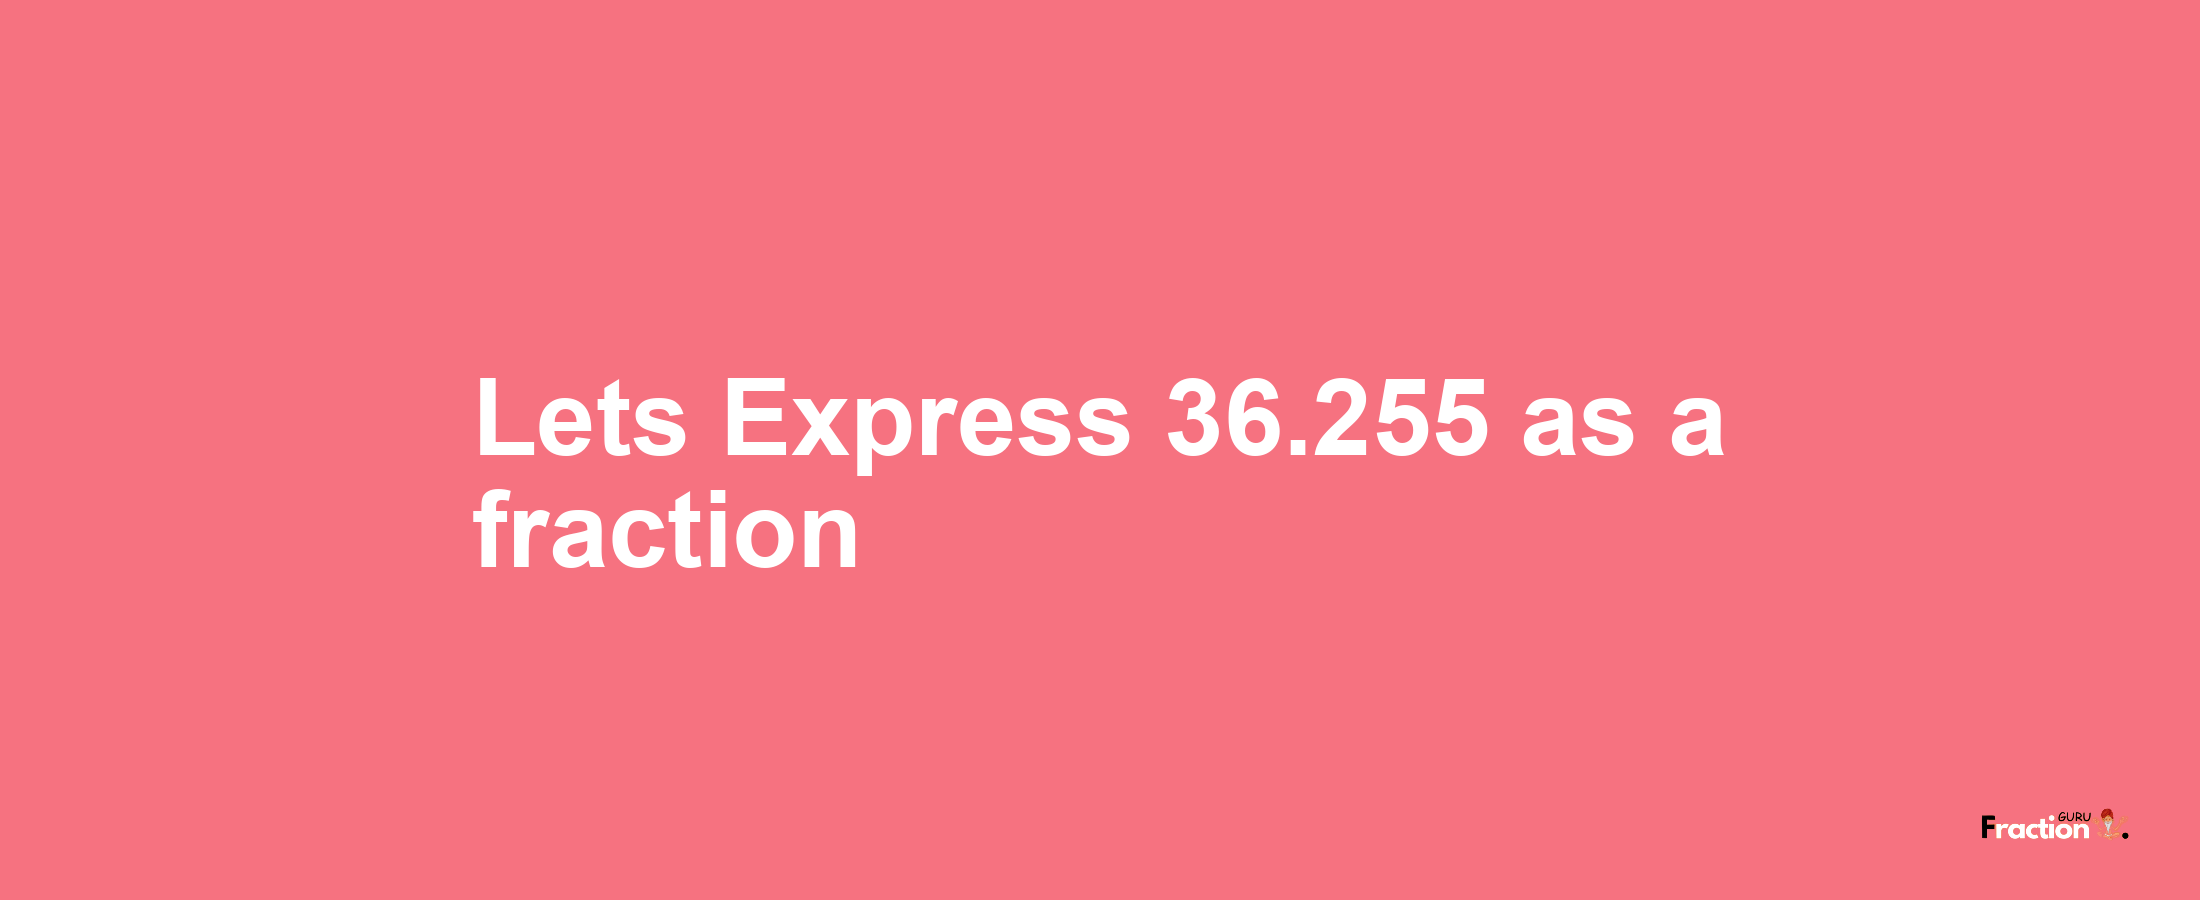 Lets Express 36.255 as afraction